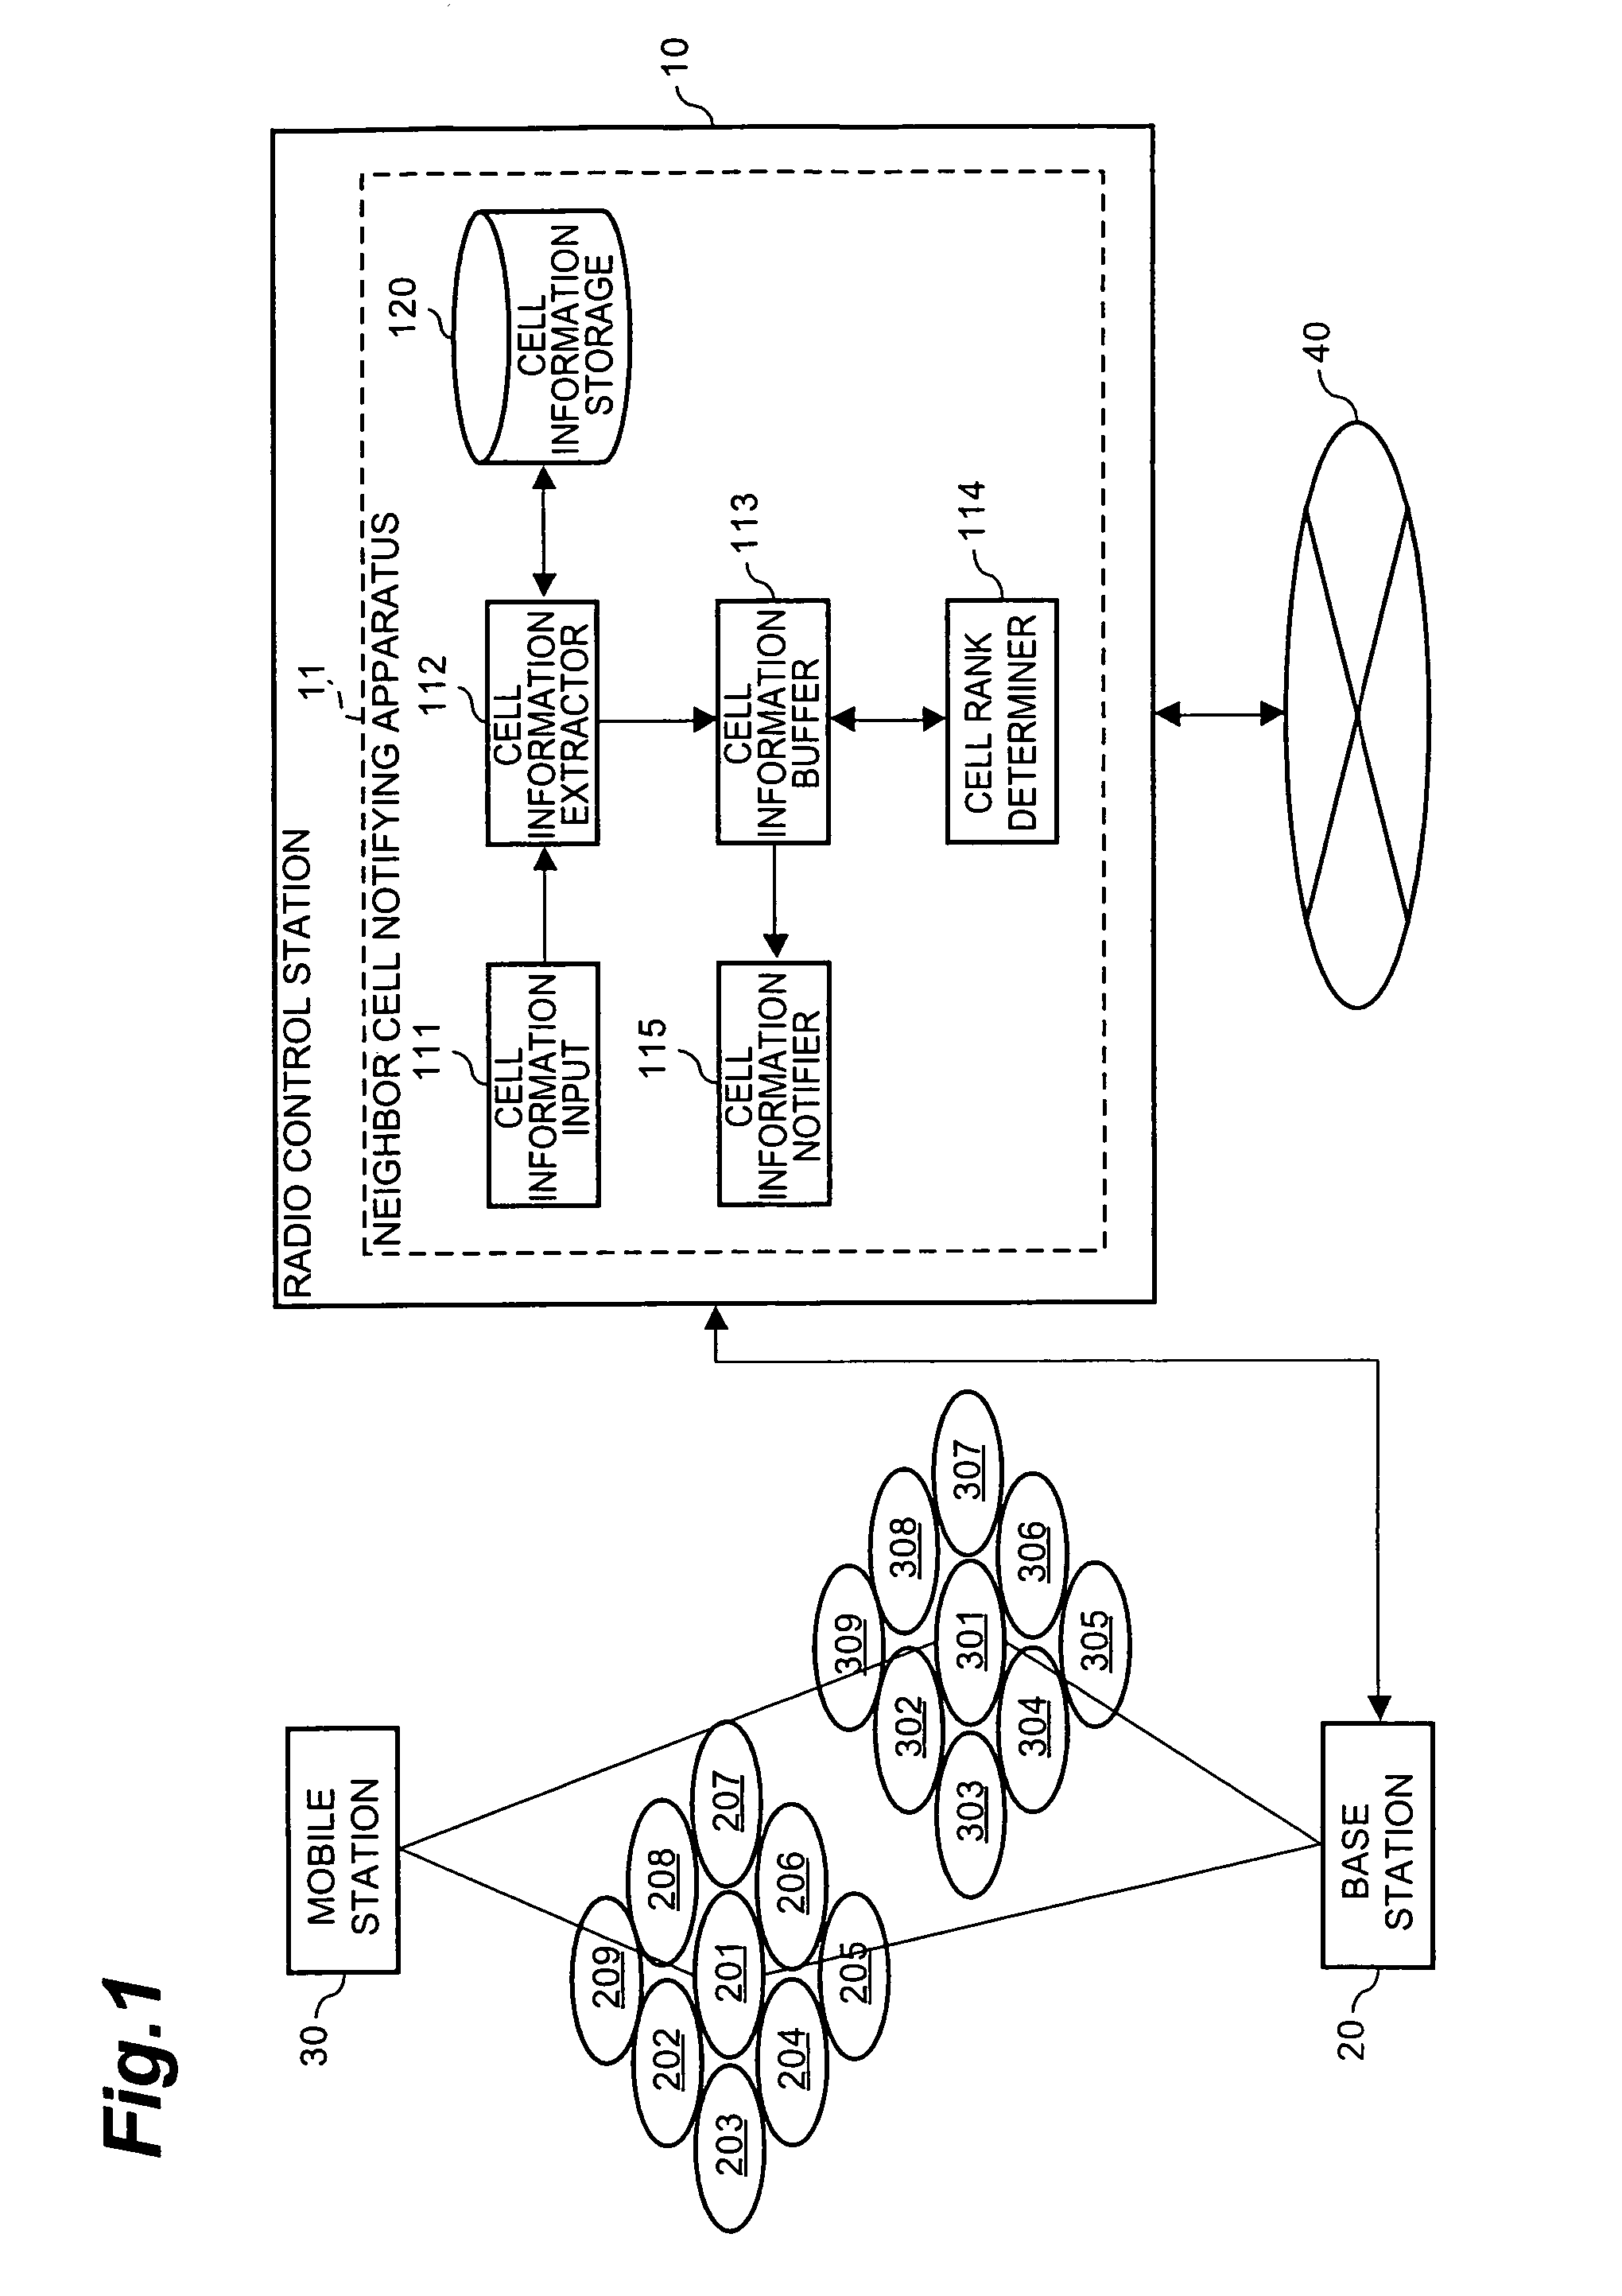 Neighbor cell notifying apparatus and neighbor cell notifying method